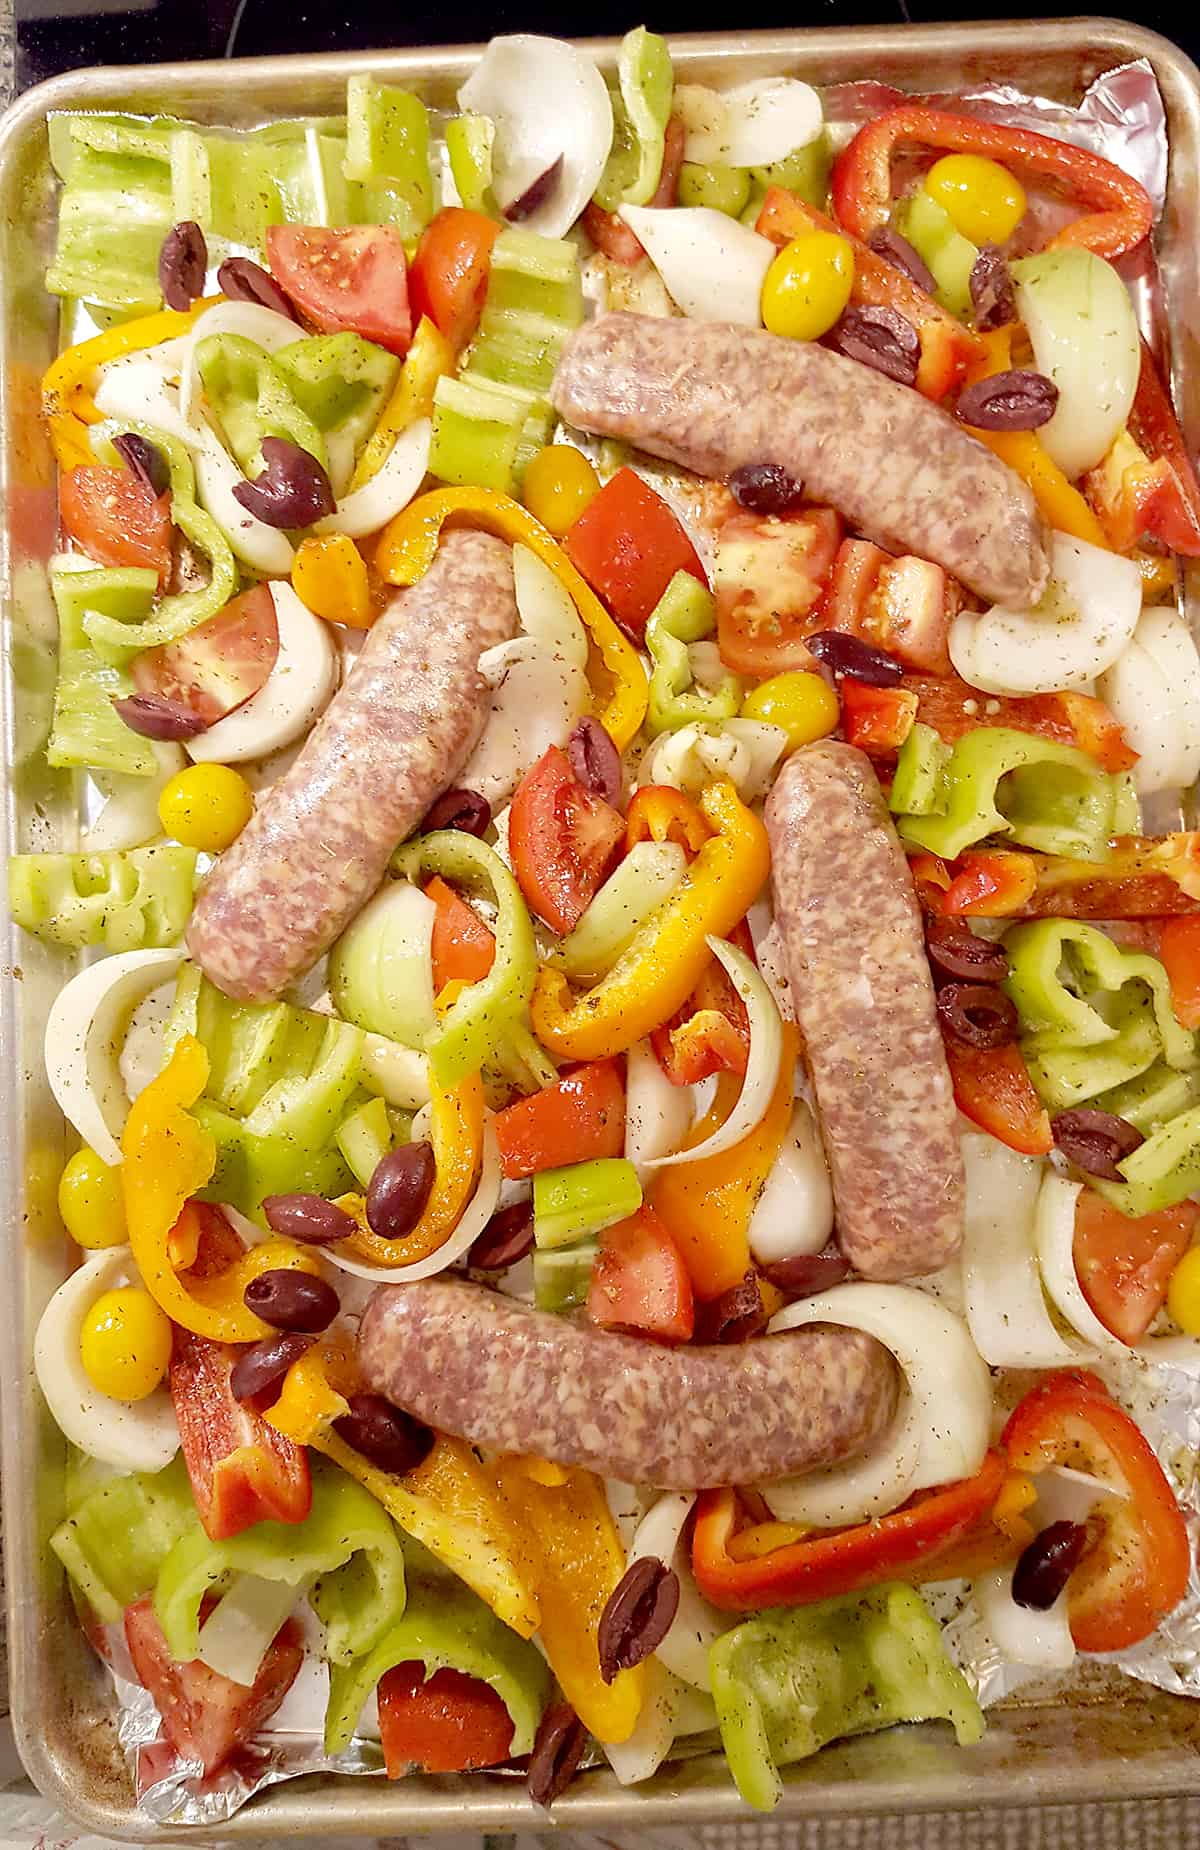 Half sheet pan with veggies and Italian sausage and olives added.